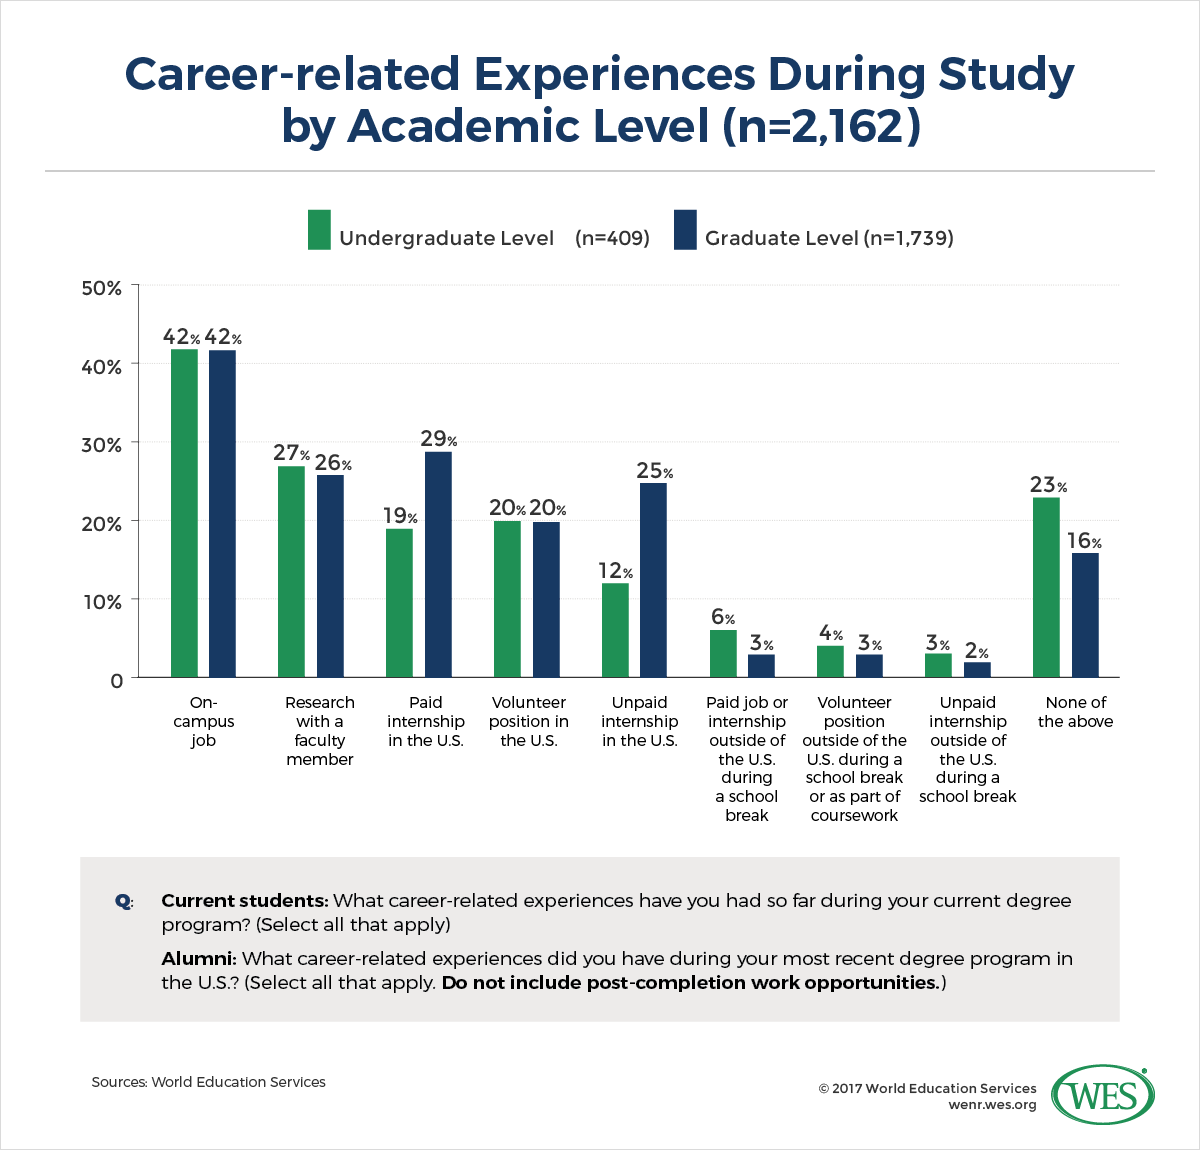 A chart showing the career-related experiences of international students and alumni during their study by academic level. 